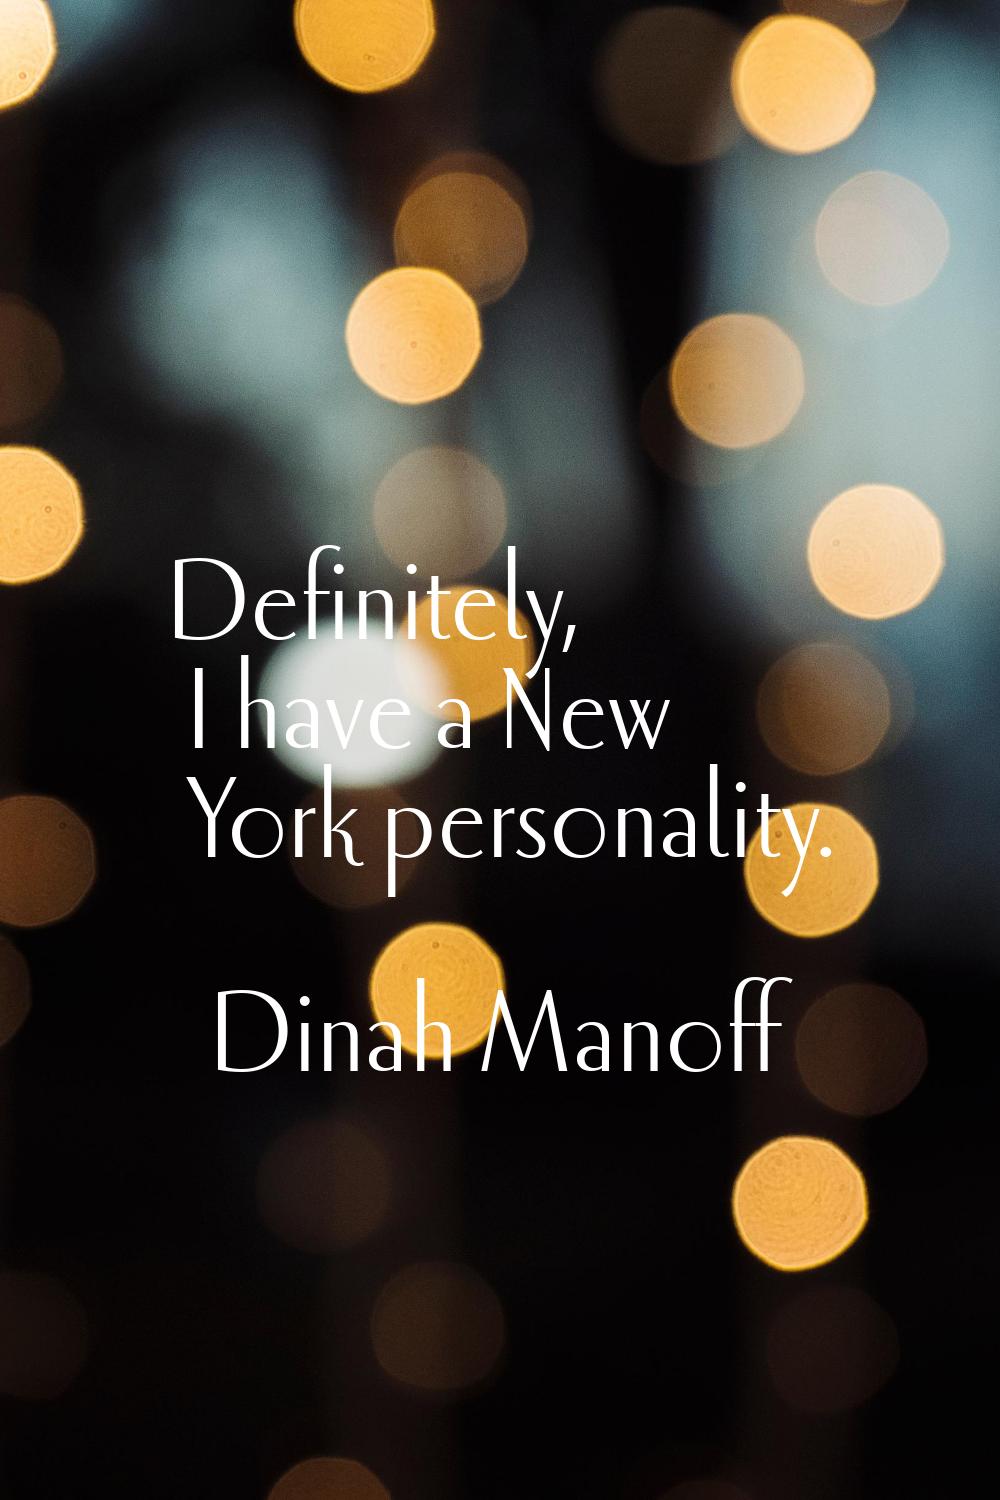 Definitely, I have a New York personality.